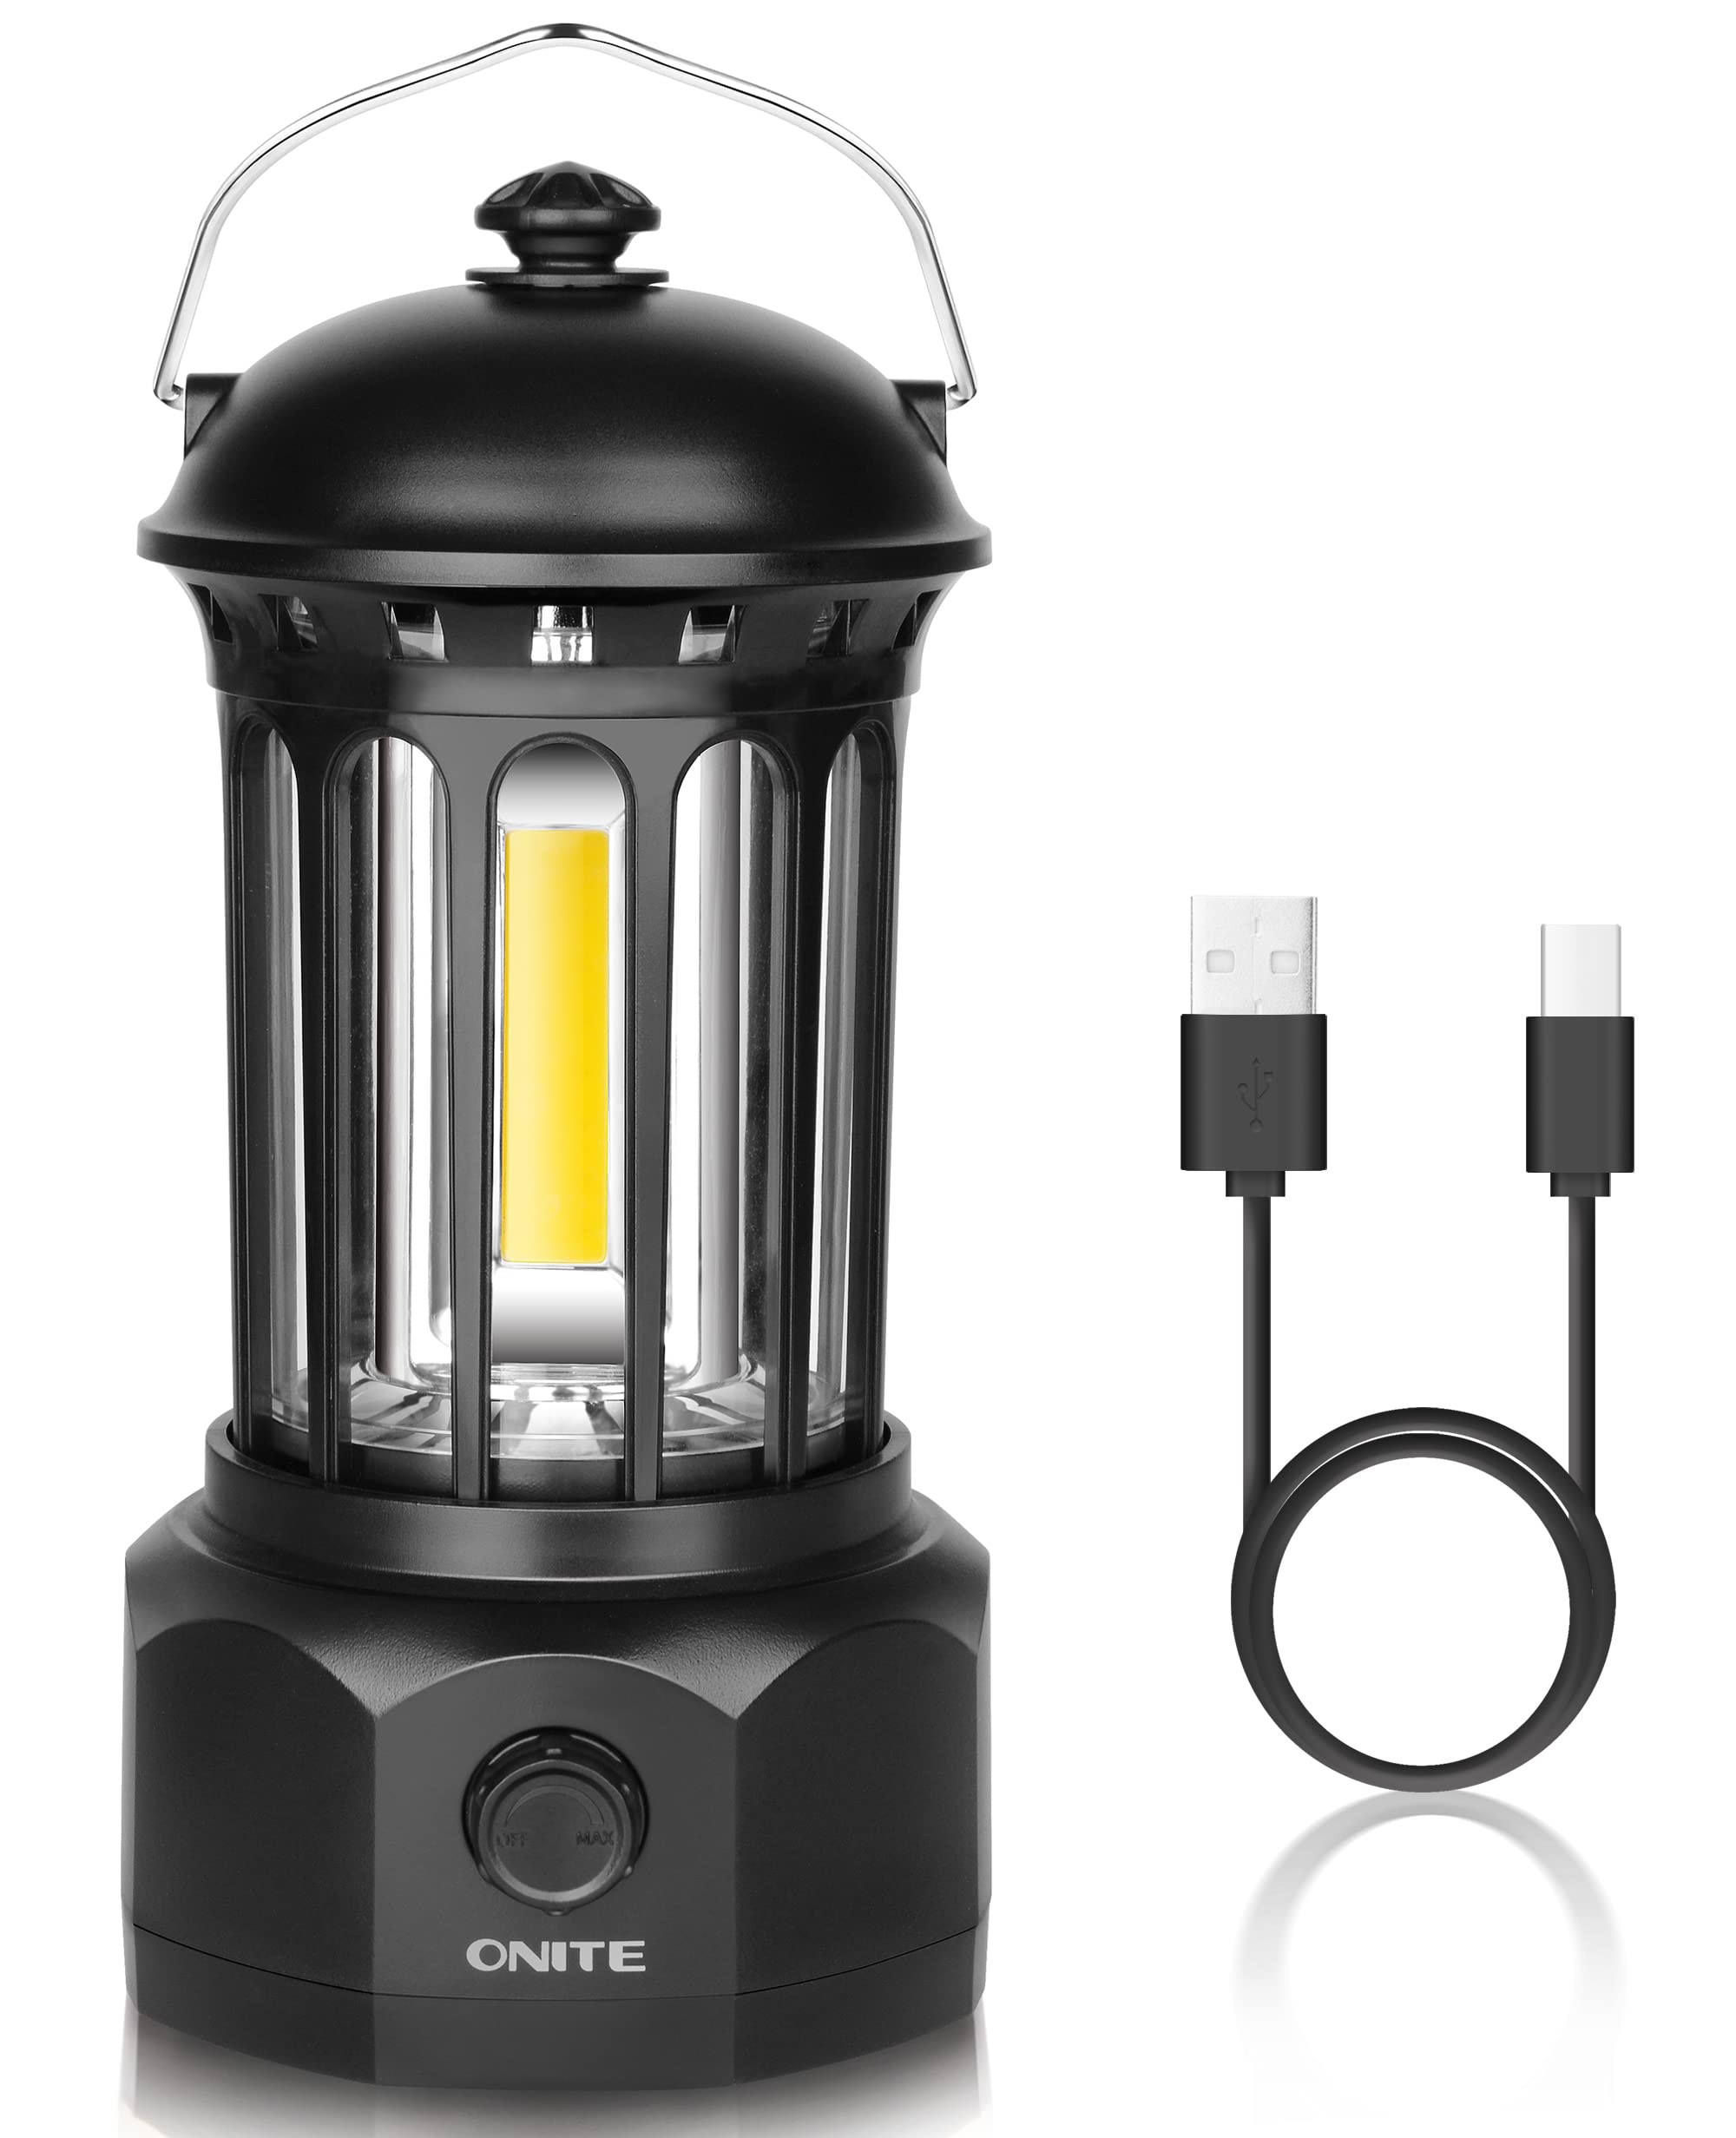  Etekcity Lantern Camping Essentials Lights, Led Lantern for  Power Outages, Tent Lights for Emergency, Hurricane, Battery Powered  Flashlight, Survival Kits, Operated Lamp, 2 Pack, Black : Sports & Outdoors